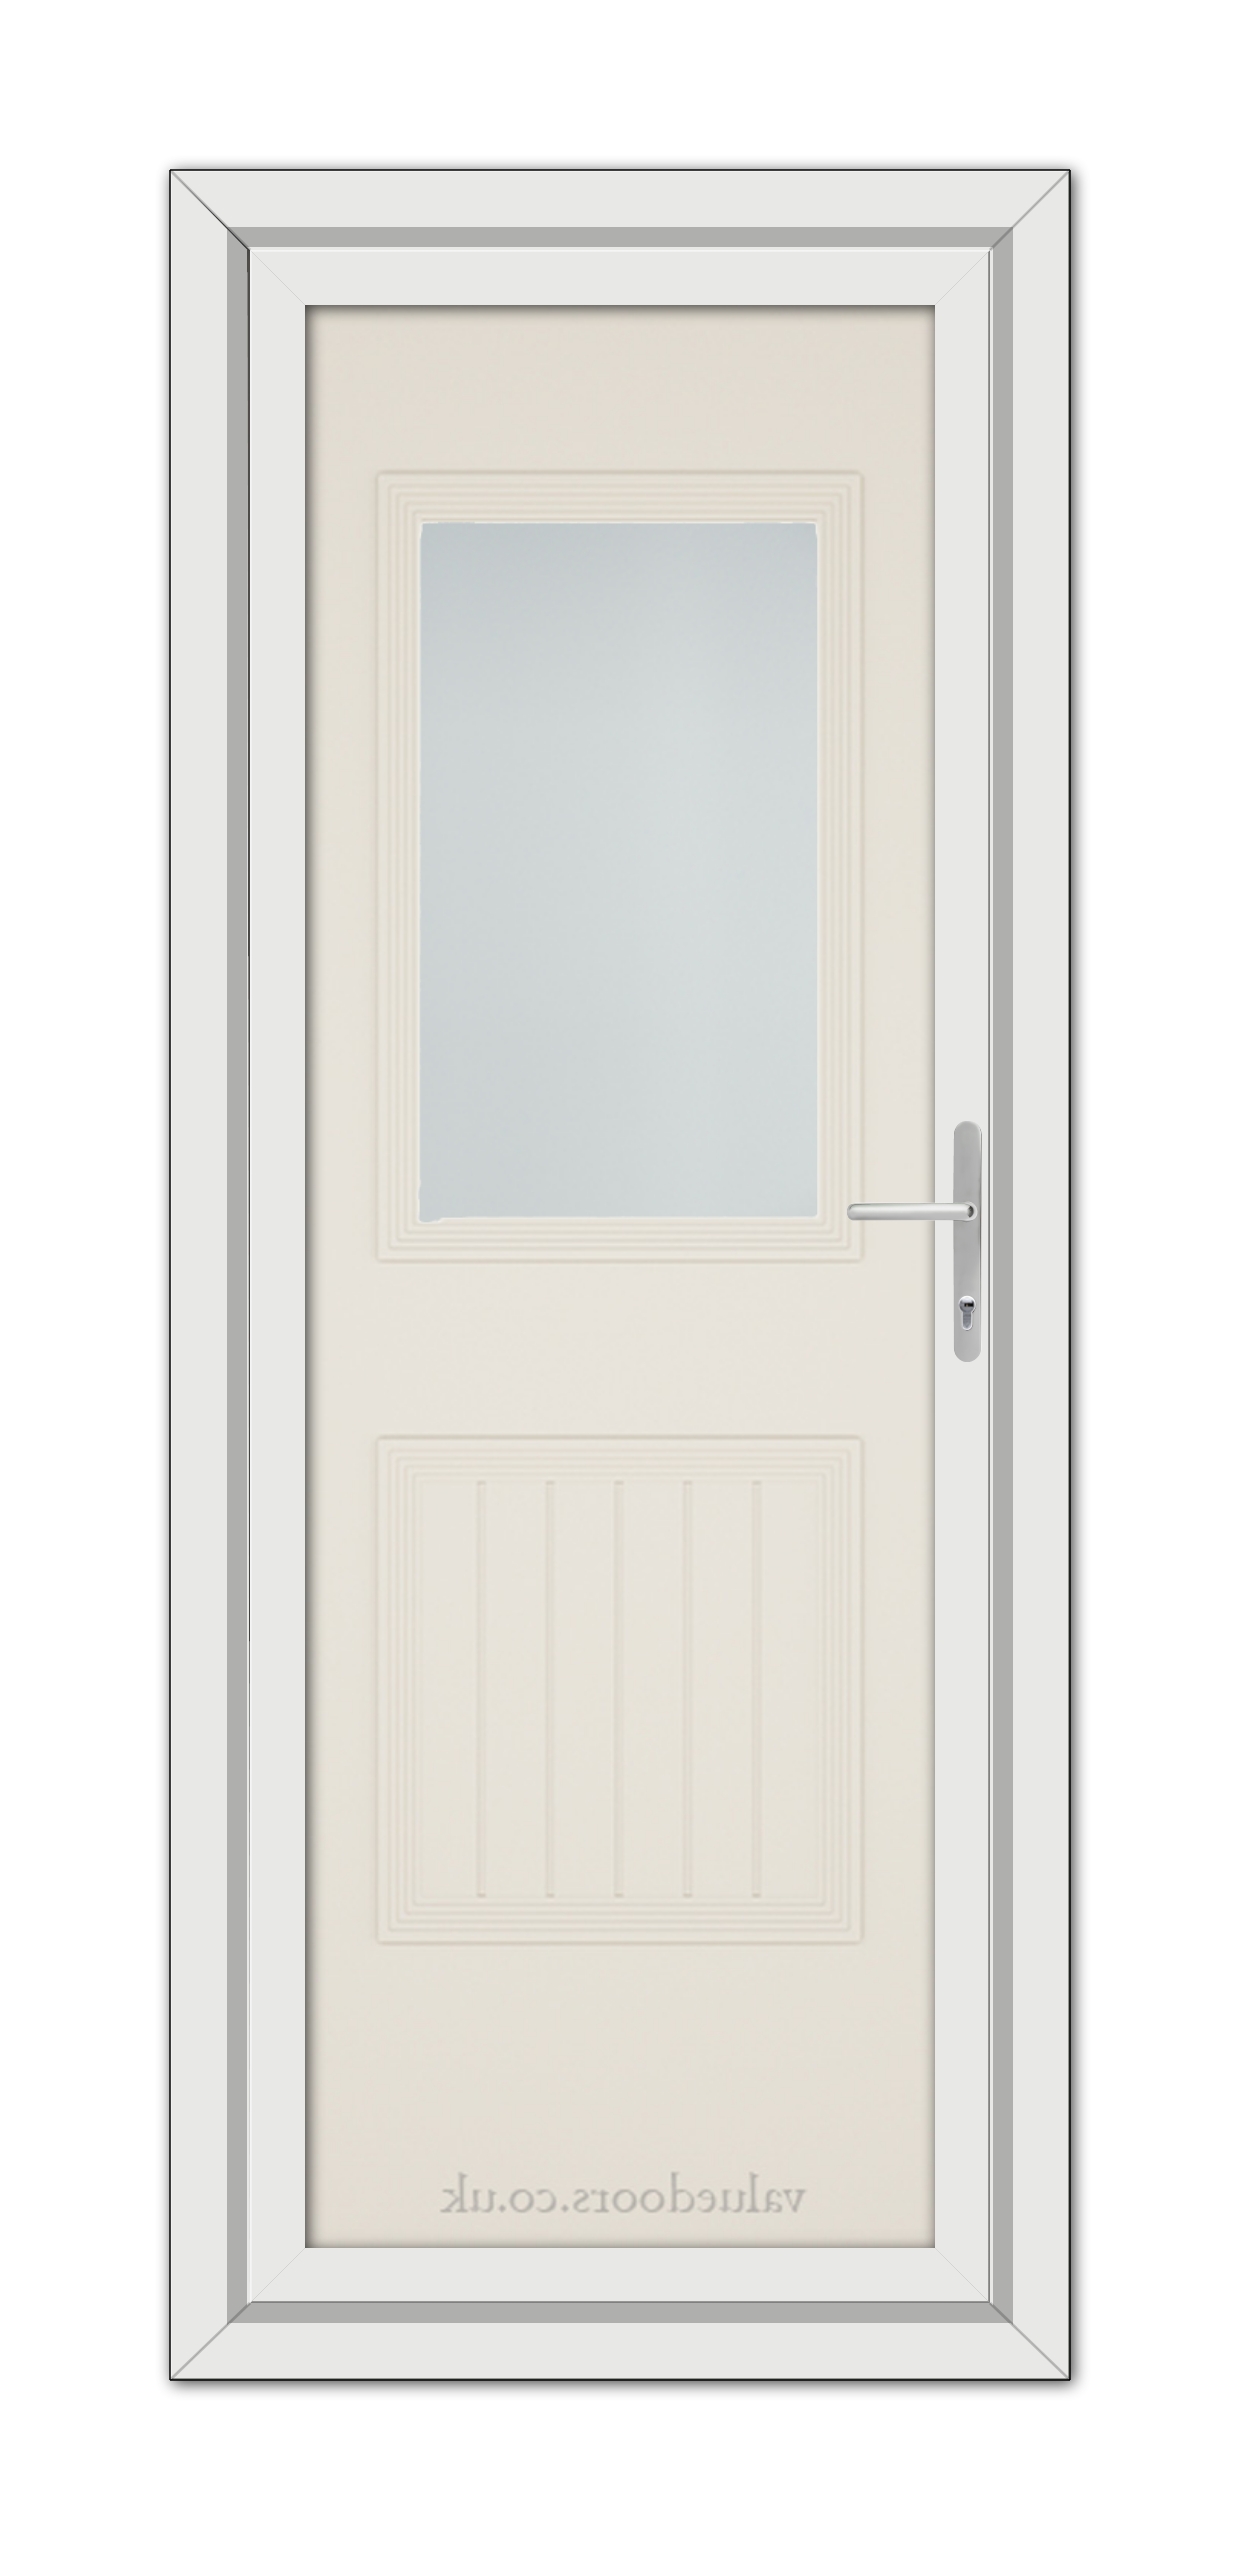 A vertical image of a closed Cream Alnwick One uPVC Door with a rectangular frosted glass panel near the top and a silver handle on the right side.